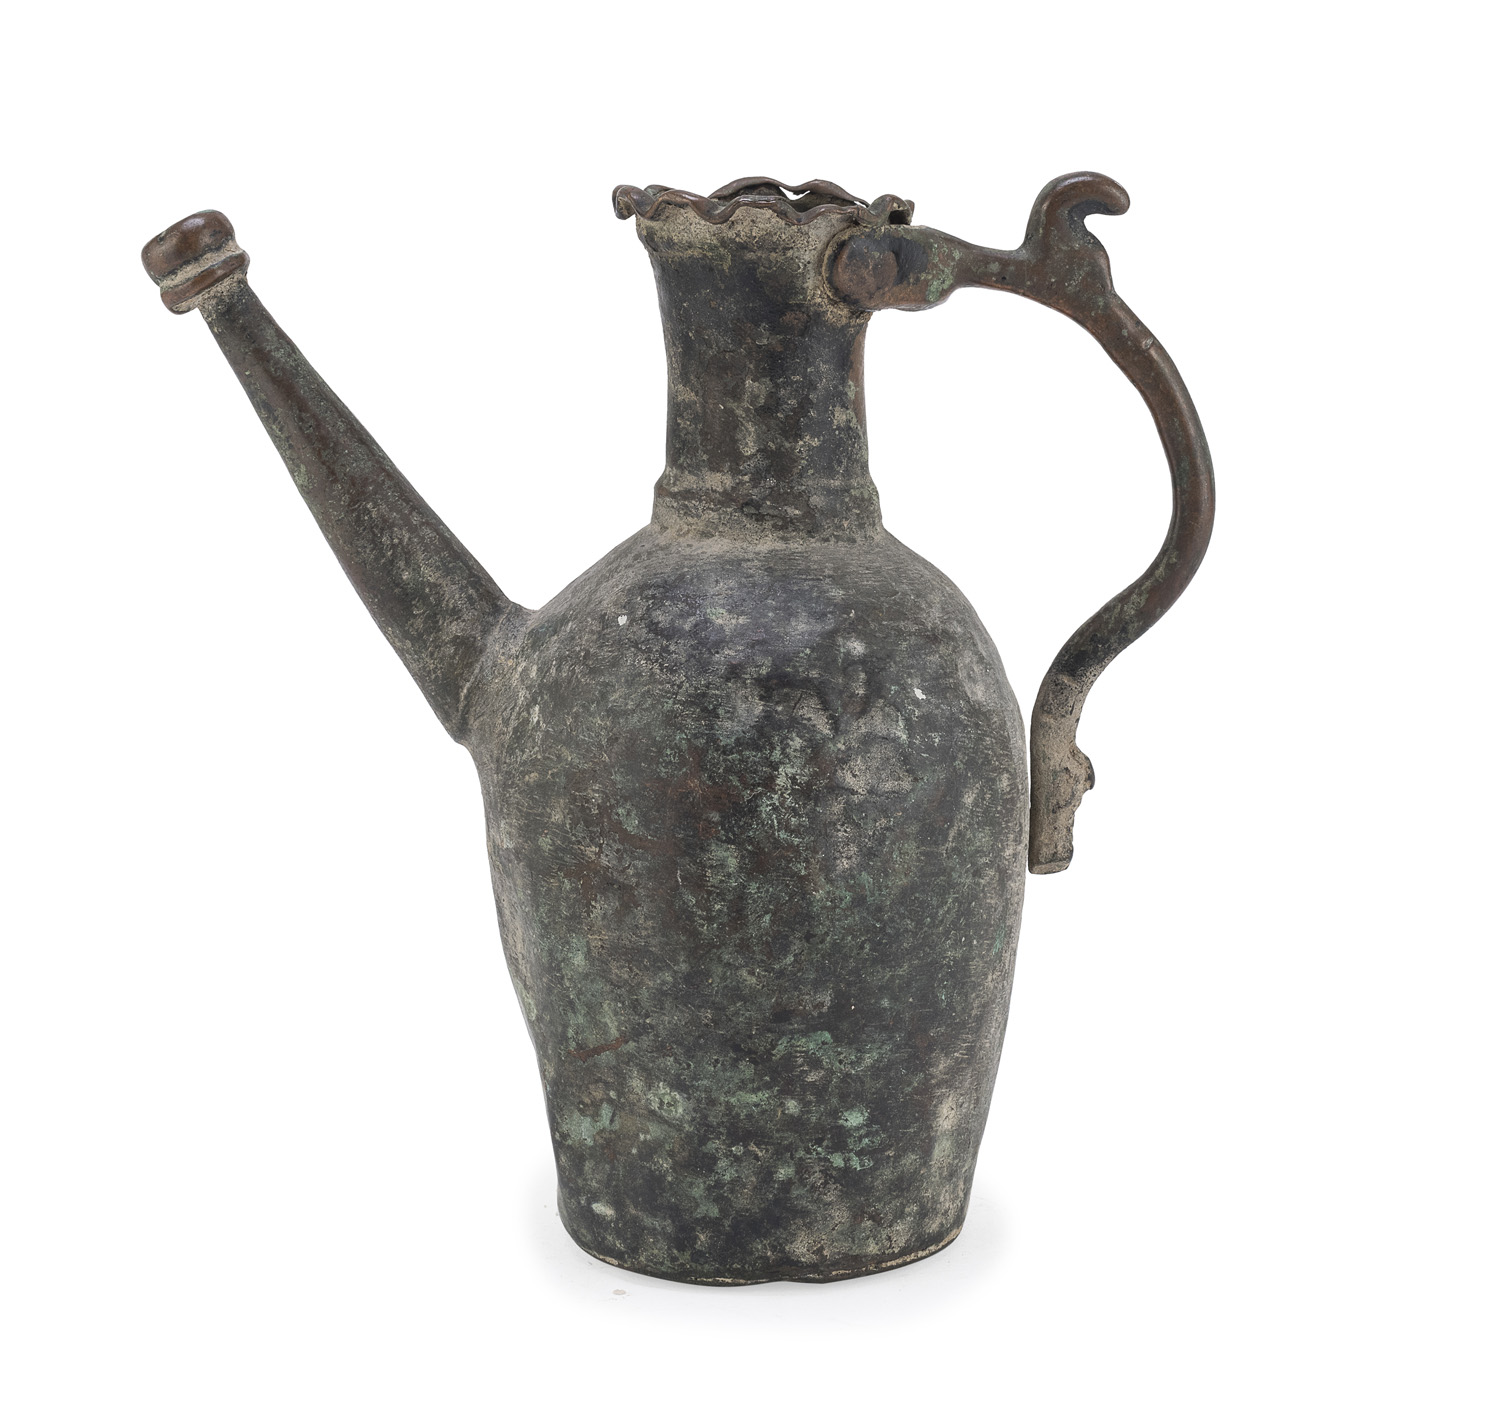 A FAR EAST METAL PITCHER. EARLY 20TH CENTURY. DEFECTS.